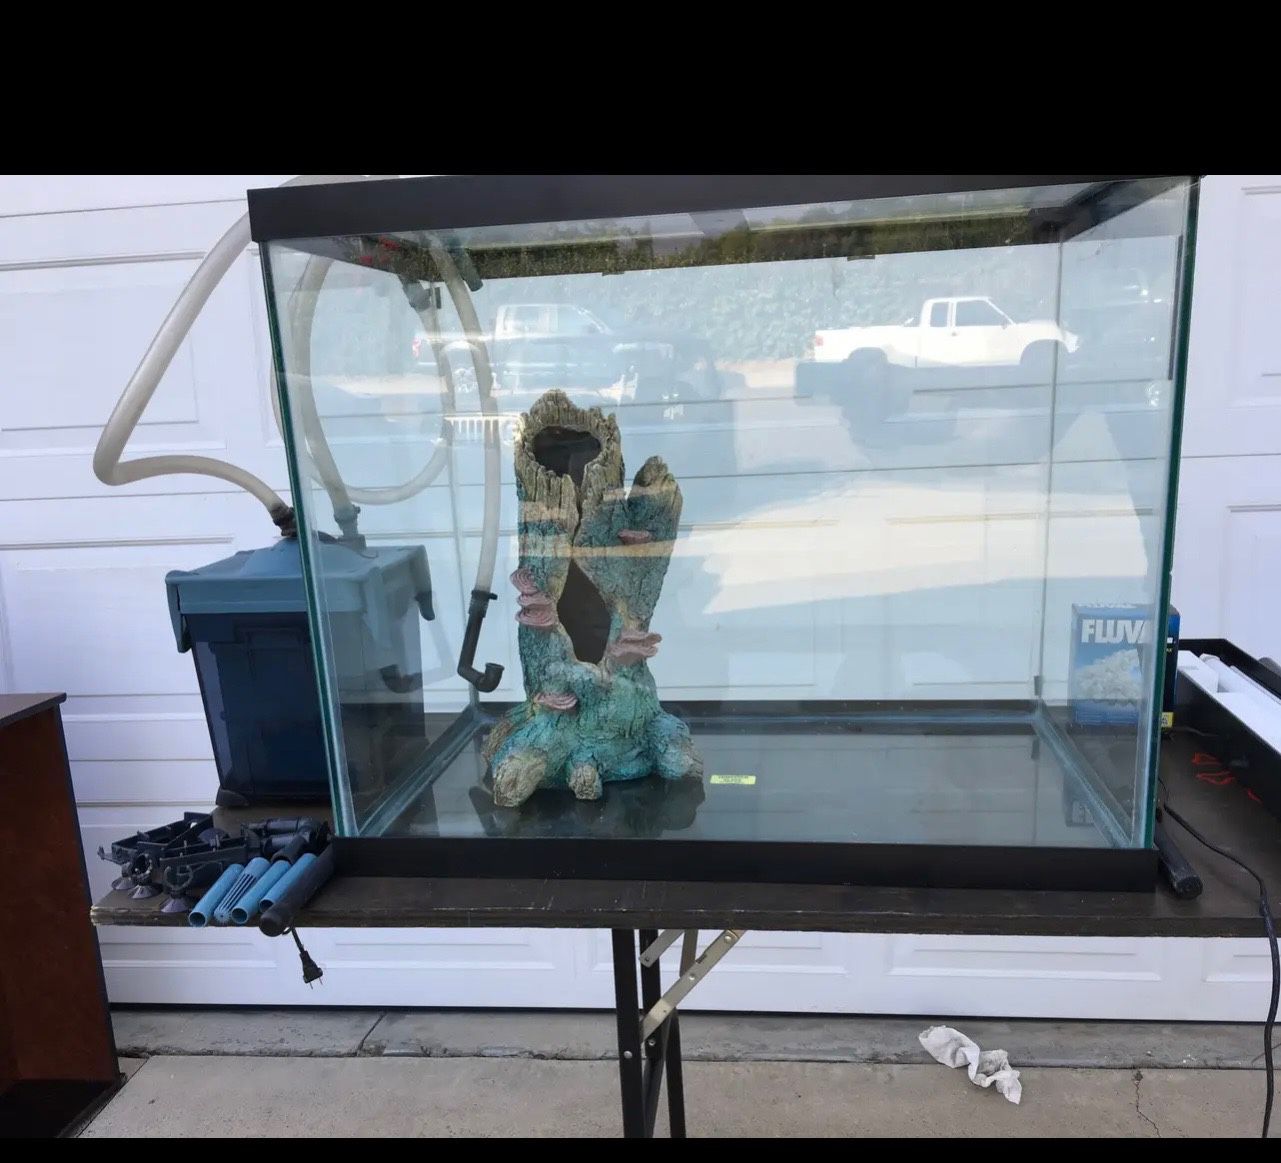 57 Gallon Fish Tank, Stand, And Assorted Items.